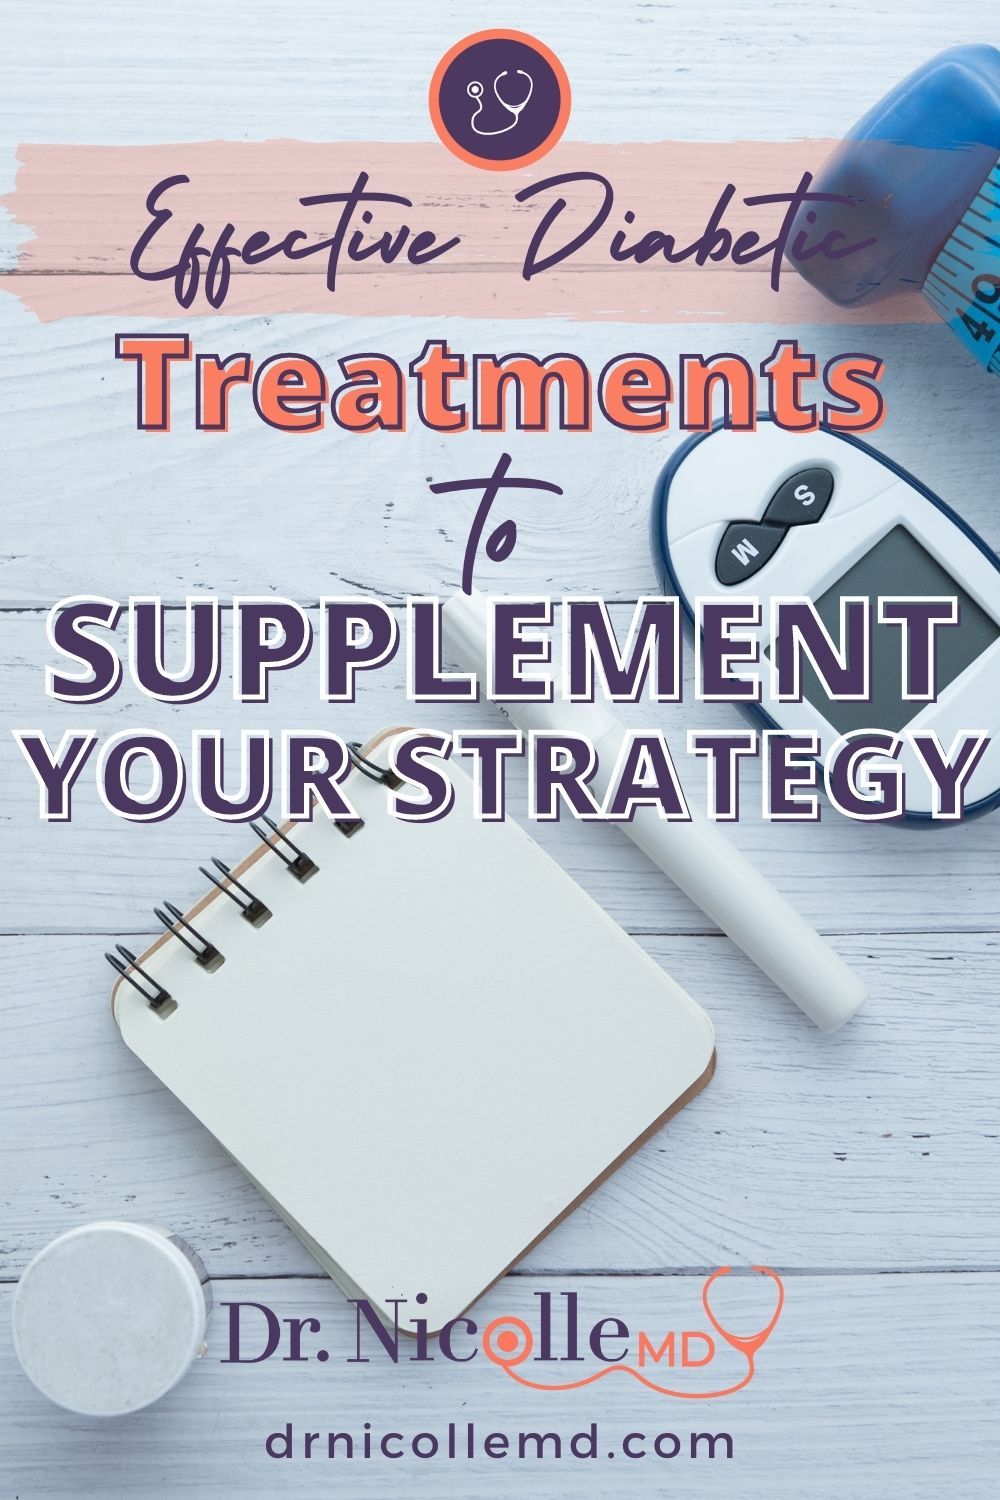 Effective Diabetic Treatments to Supplement Your Strategy